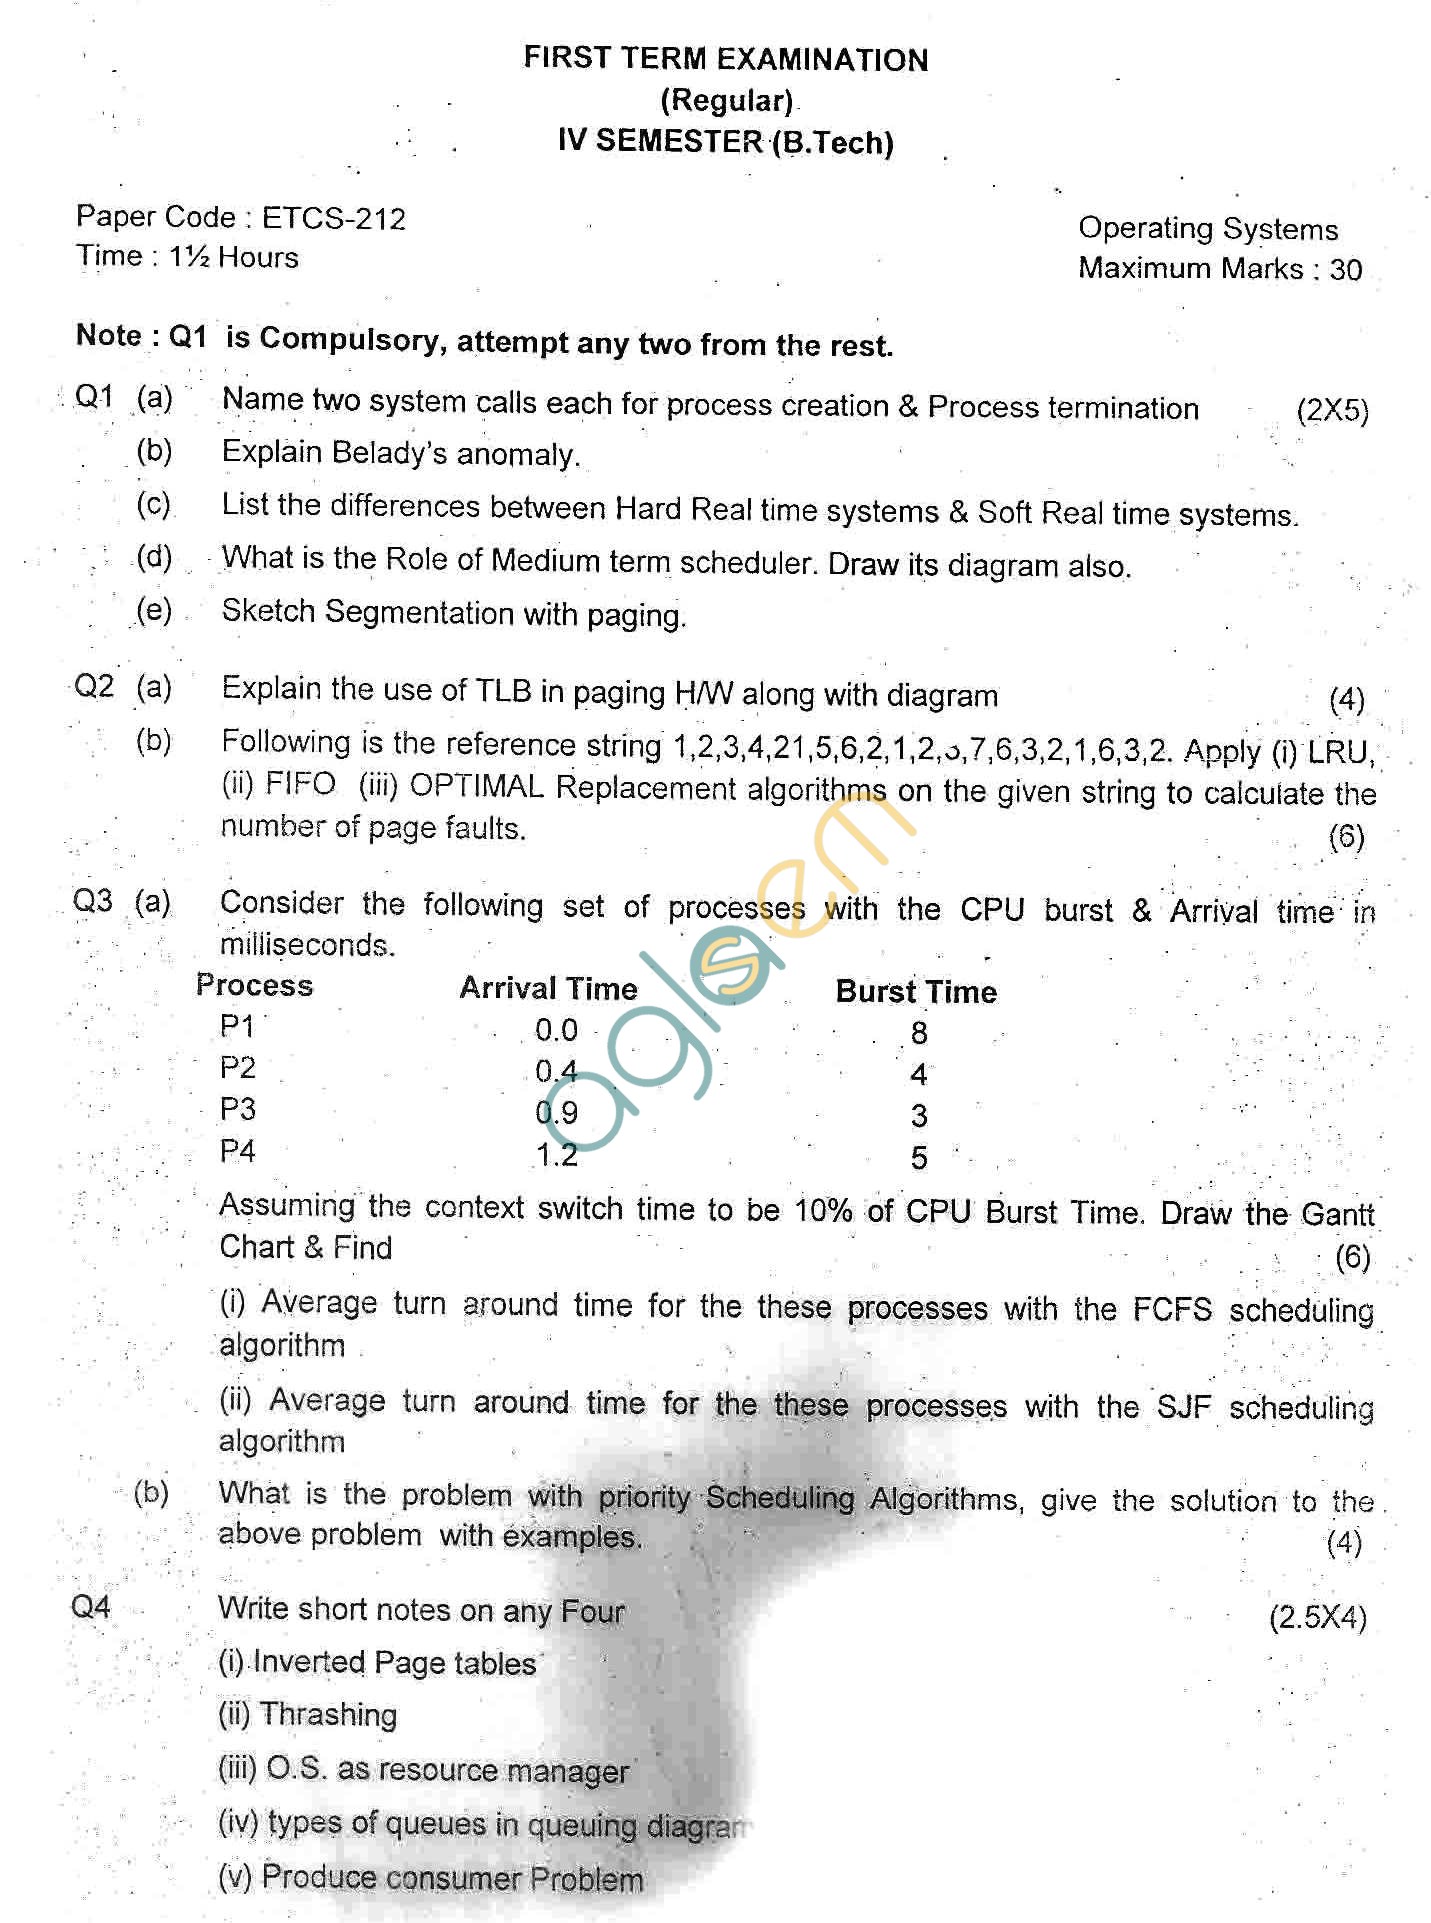 GGSIPU Question Papers Fourth Semester – First Term 2012 – ETCS-212